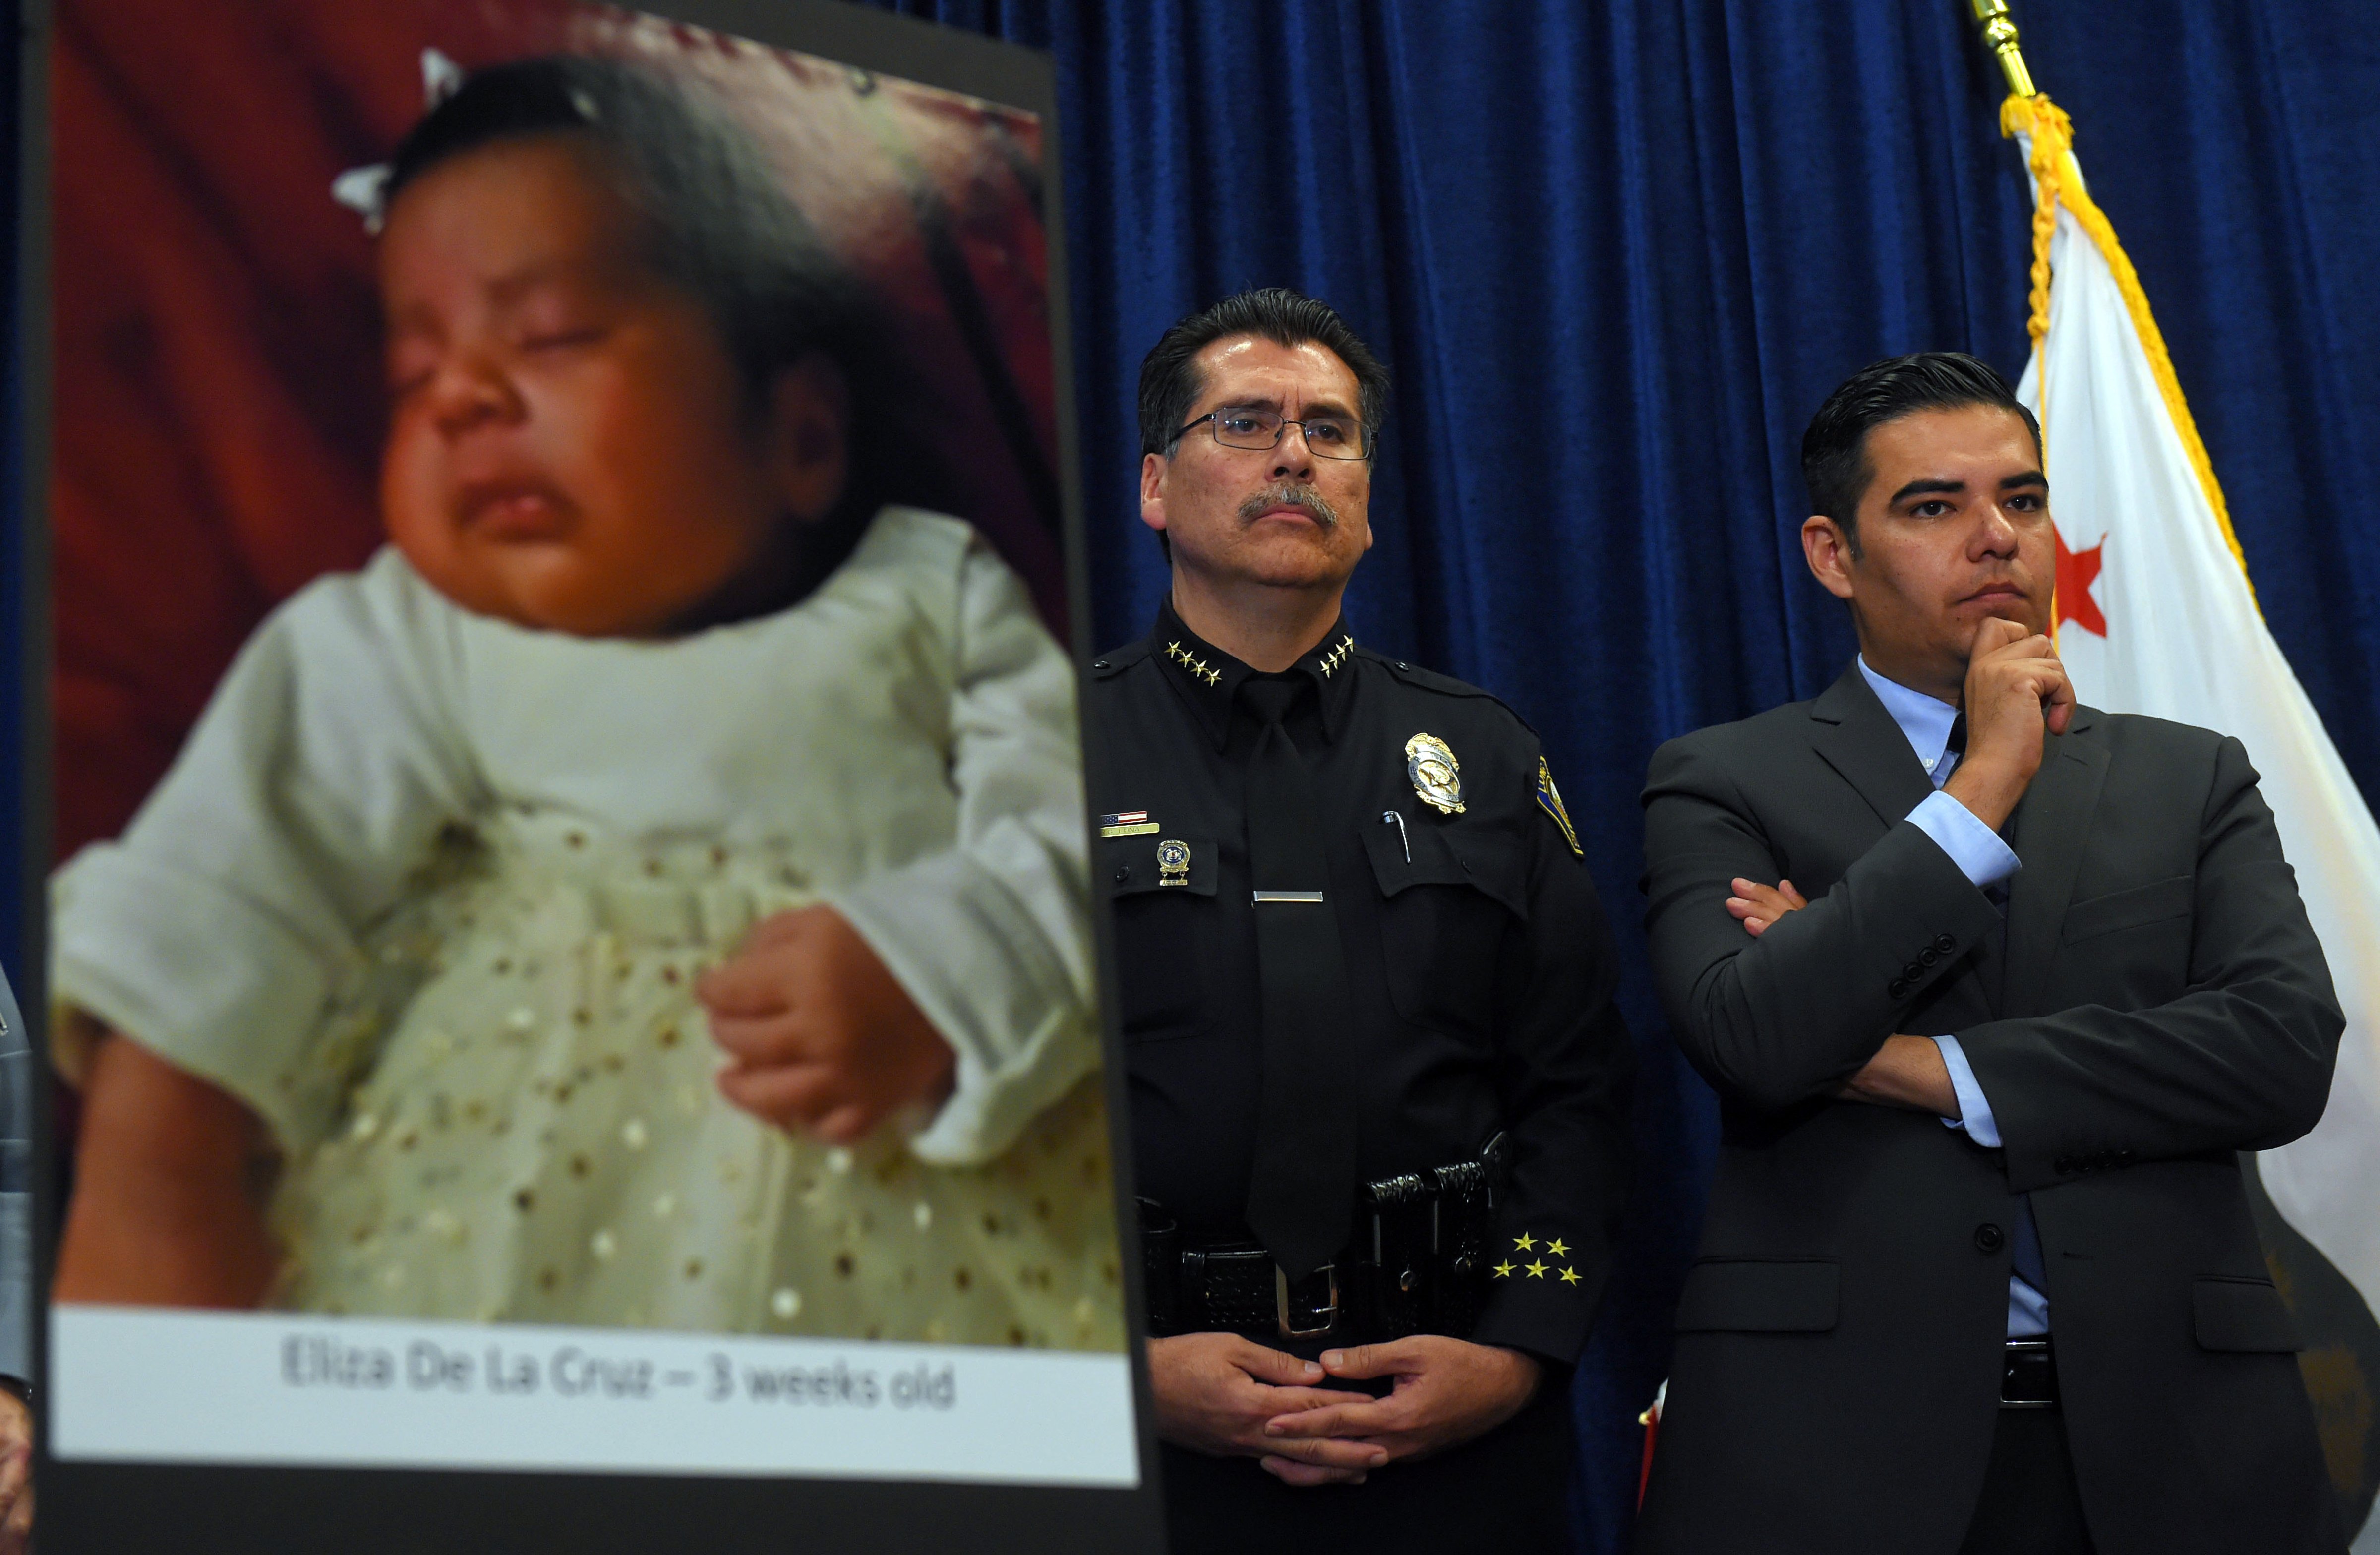 Long Beach police chief Robert Luna, left, and Mayor Robert Garcia stand during a news conference in Long Beach, Calif., on March 25, 2015 (Scott Varley—AP)